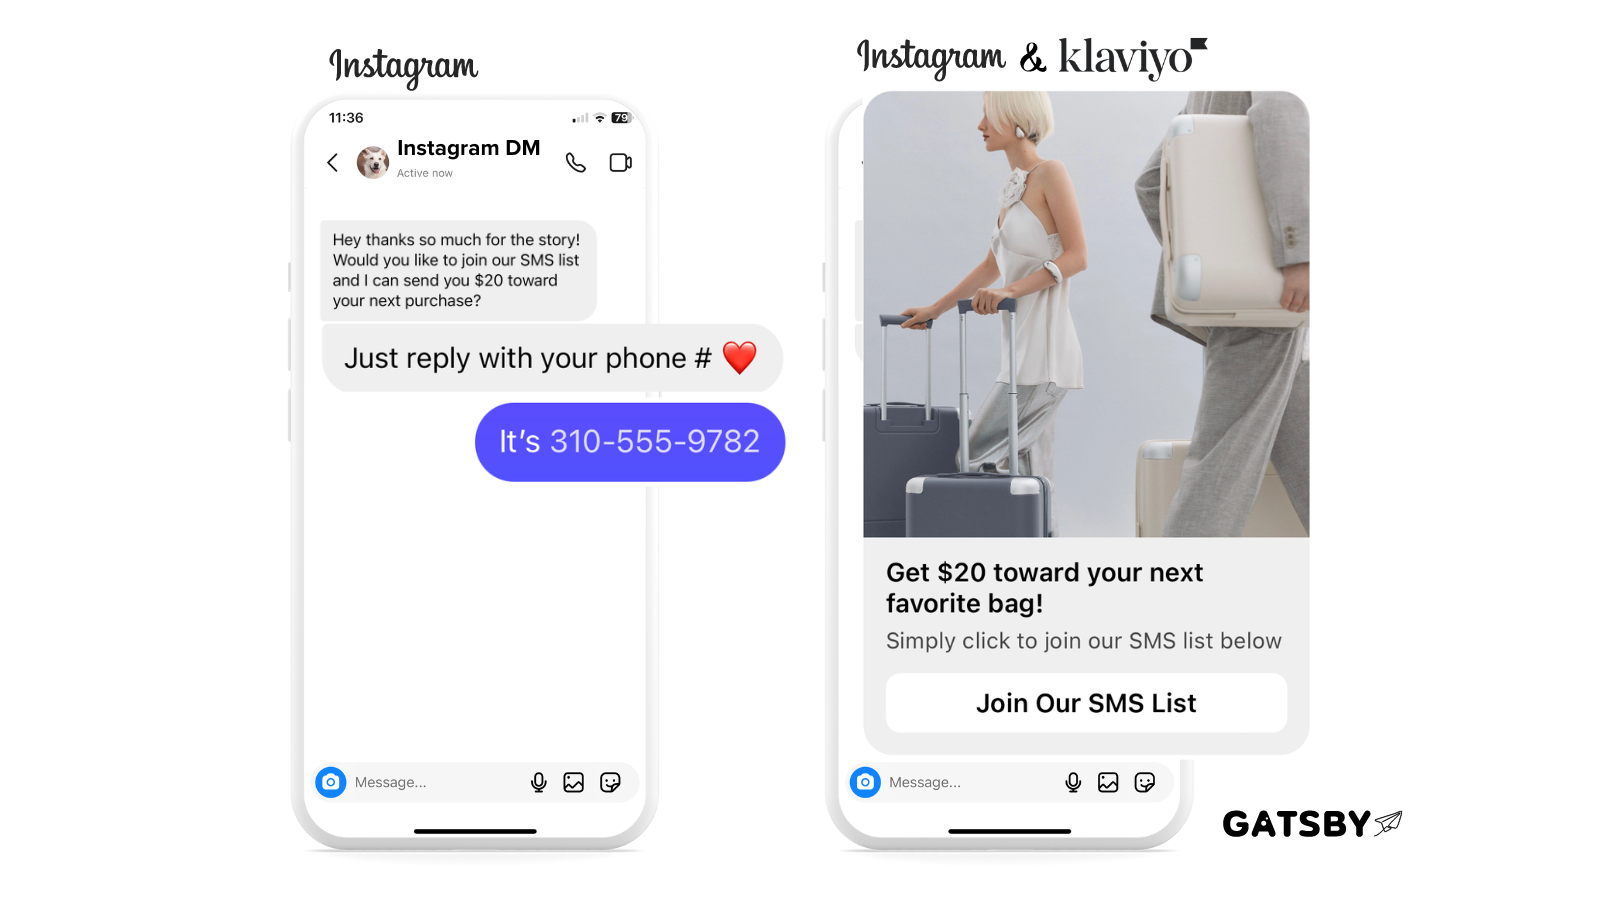 Instagram users can now subscribe to your email & SMS lists